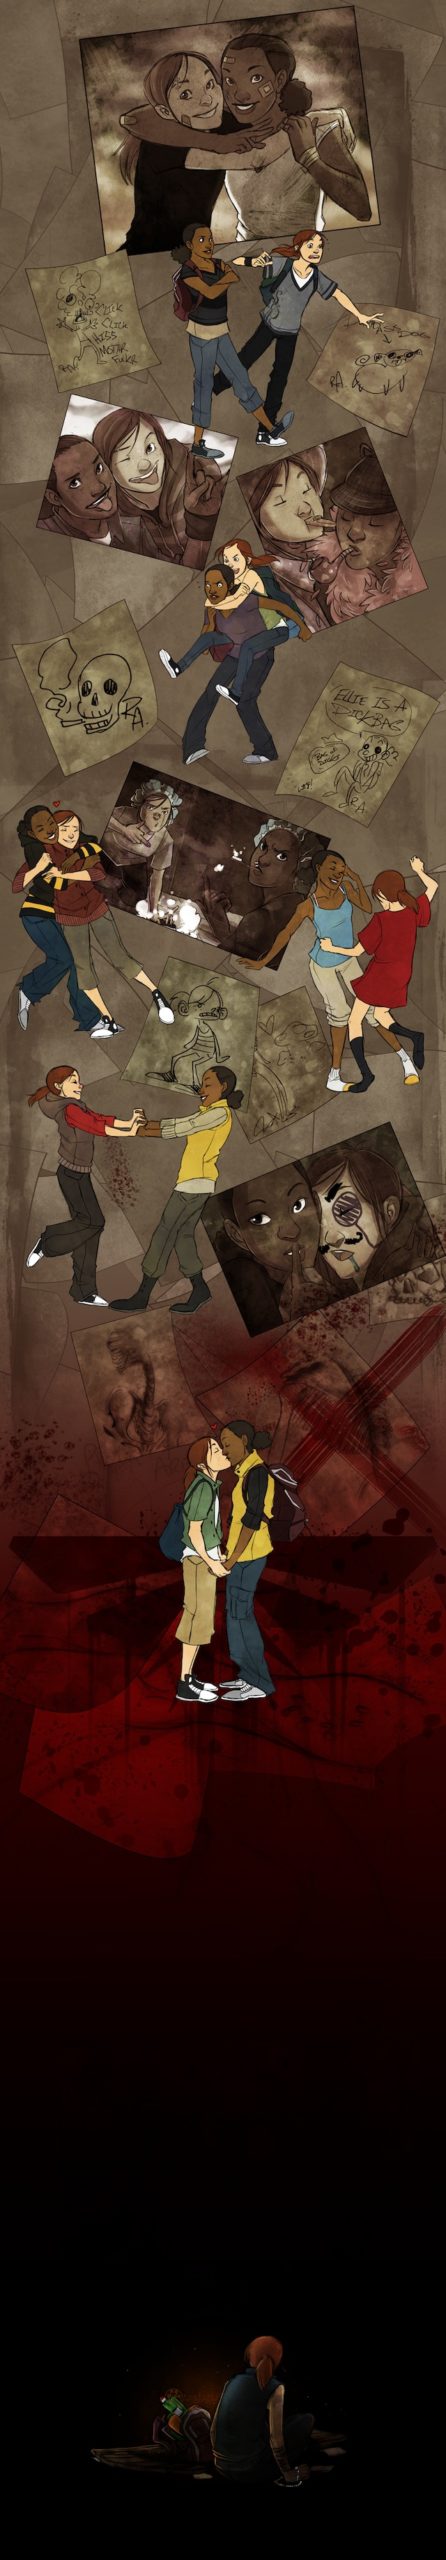 Ellie And Riley From The Last Of Us Get A Lovely Illustrated Tribute